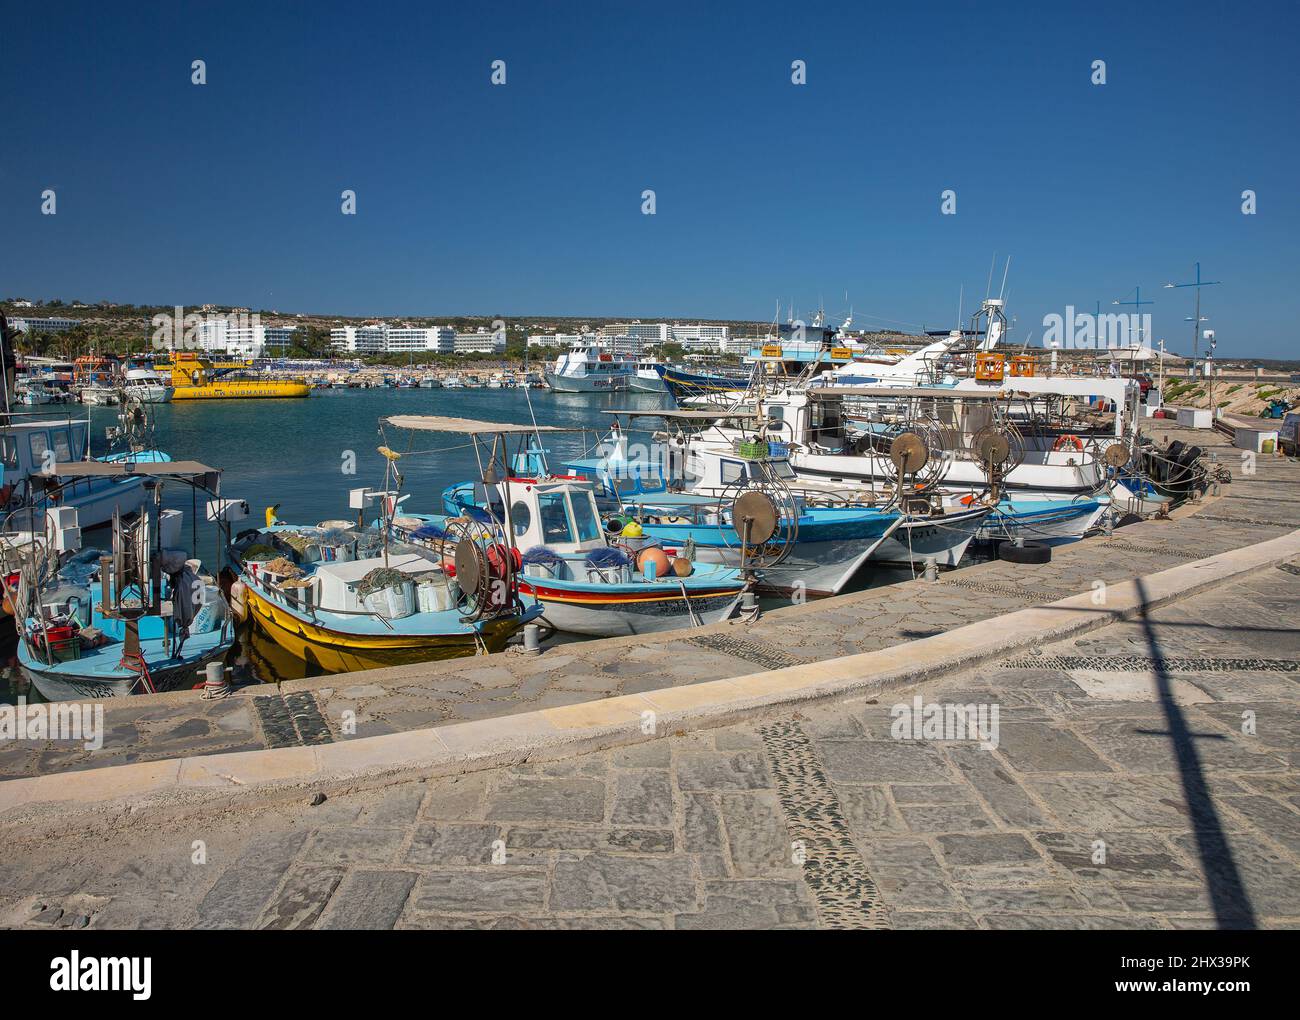 Ayia Napa, Cyprus - May 23, 2021: Boats and ships moored in seaport. Ayia Napa is a tourist resort at the far eastern end of the southern coast of Cyp Stock Photo